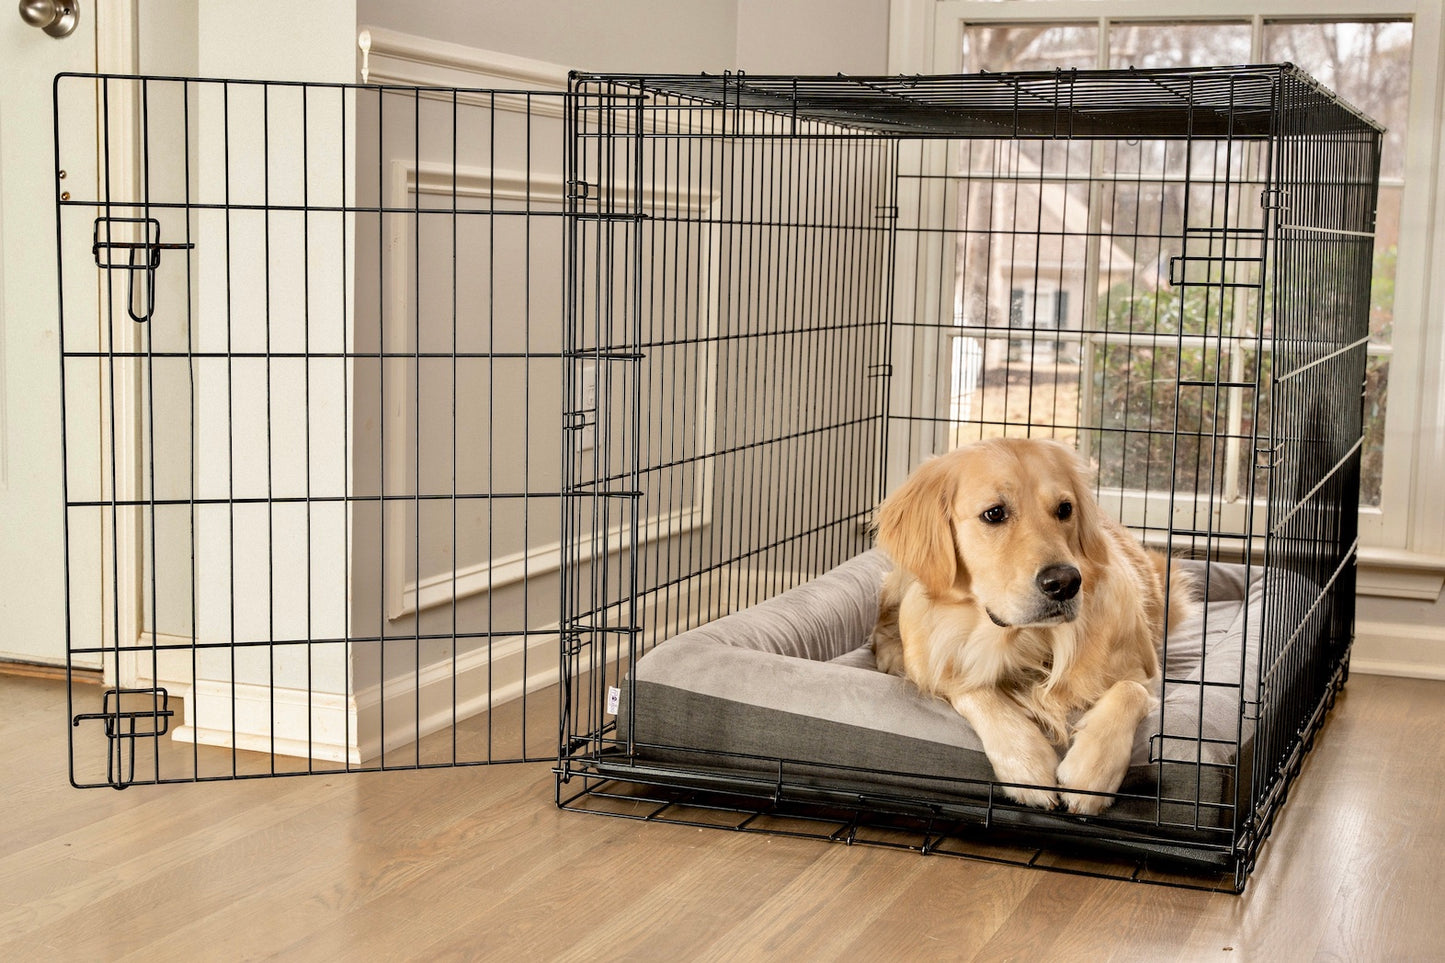 Why vets recommend a quality bed for your pet